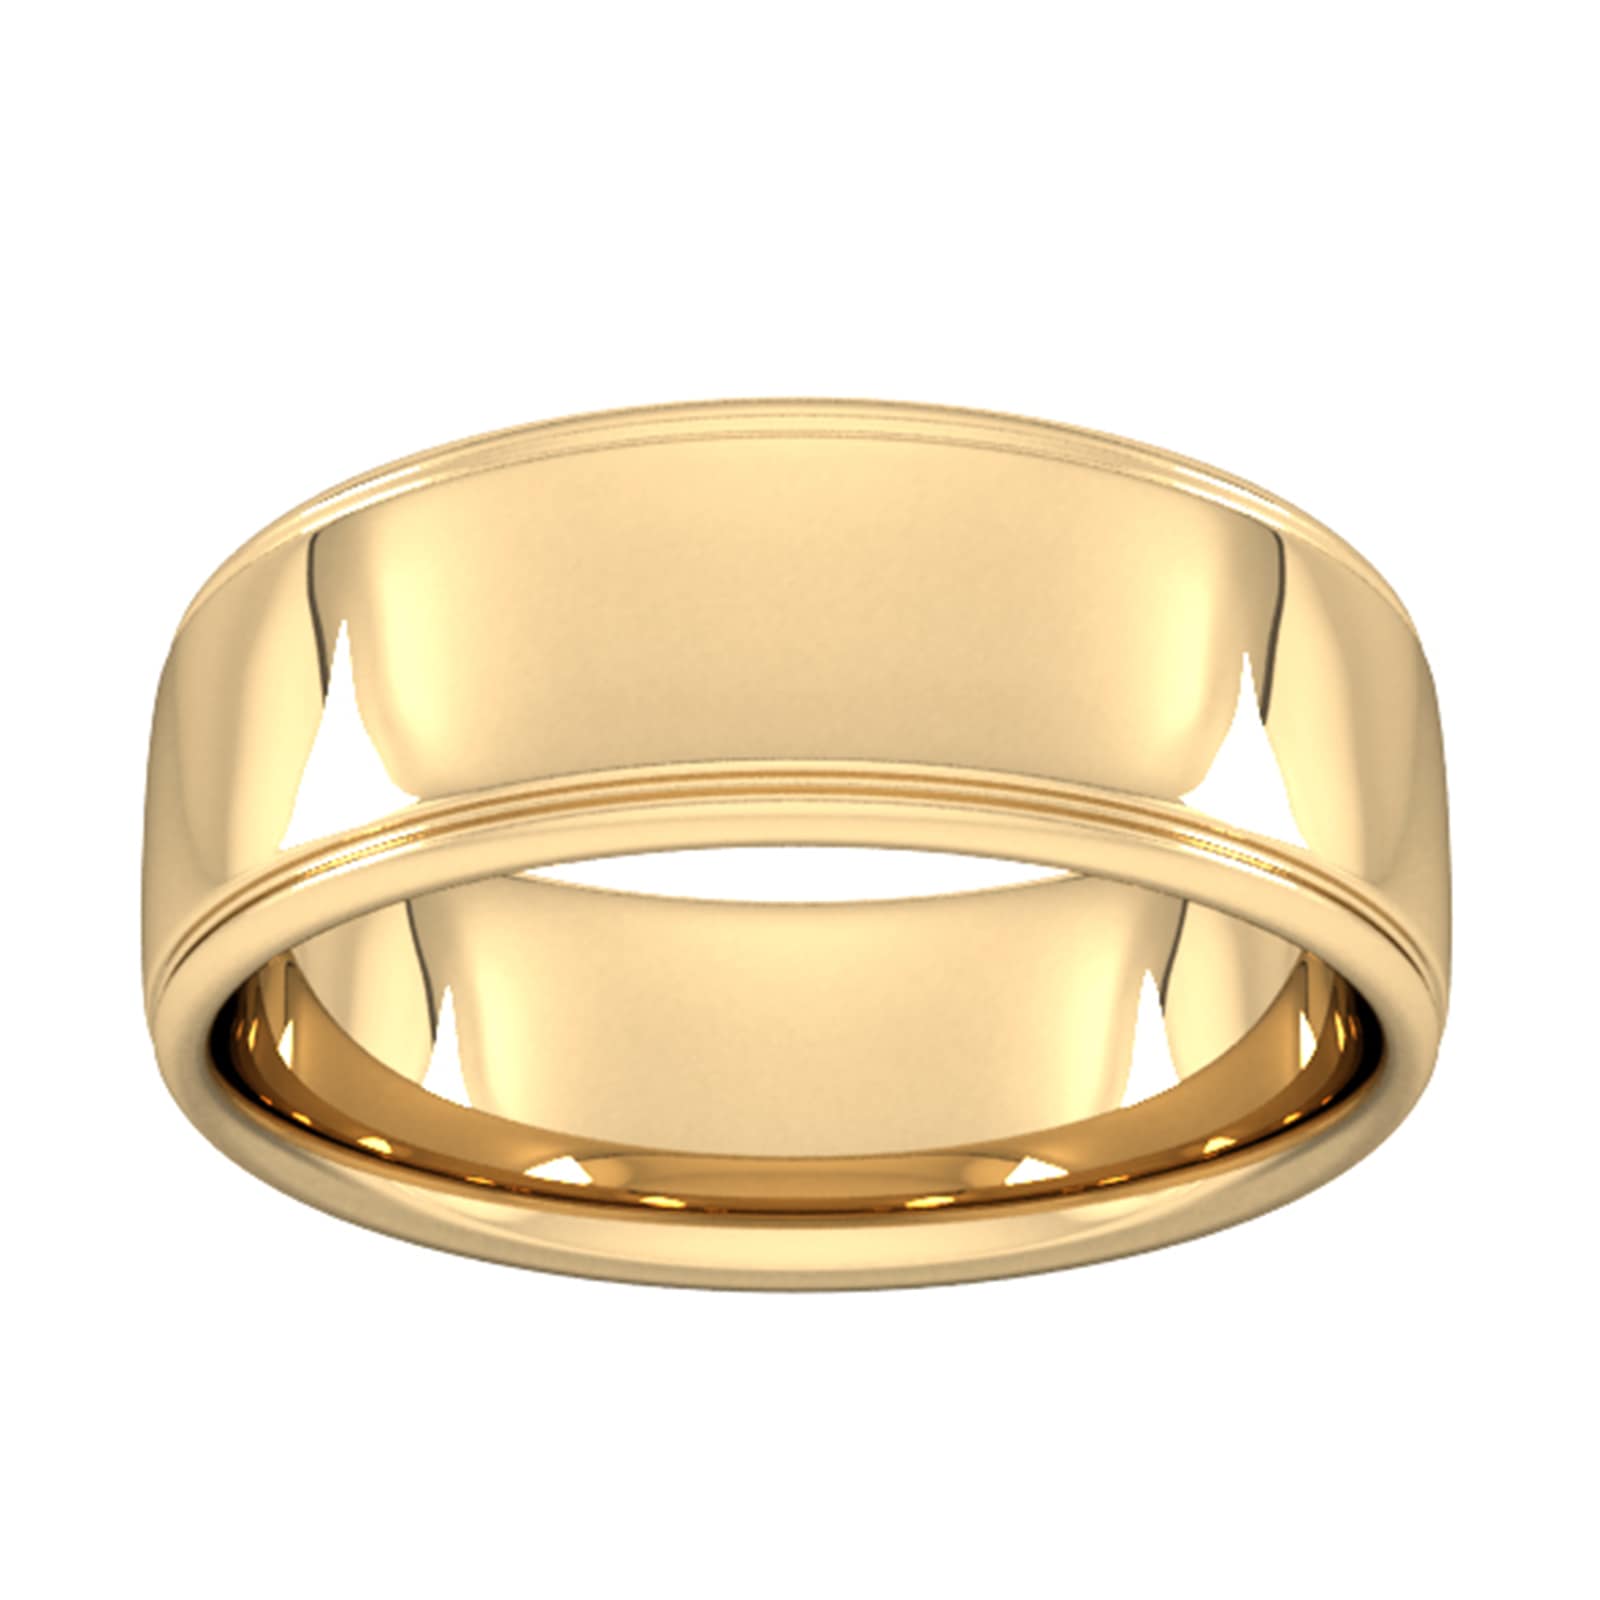 8mm Slight Court Extra Heavy Polished Finish With Grooves Wedding Ring In 9 Carat Yellow Gold - Ring Size S